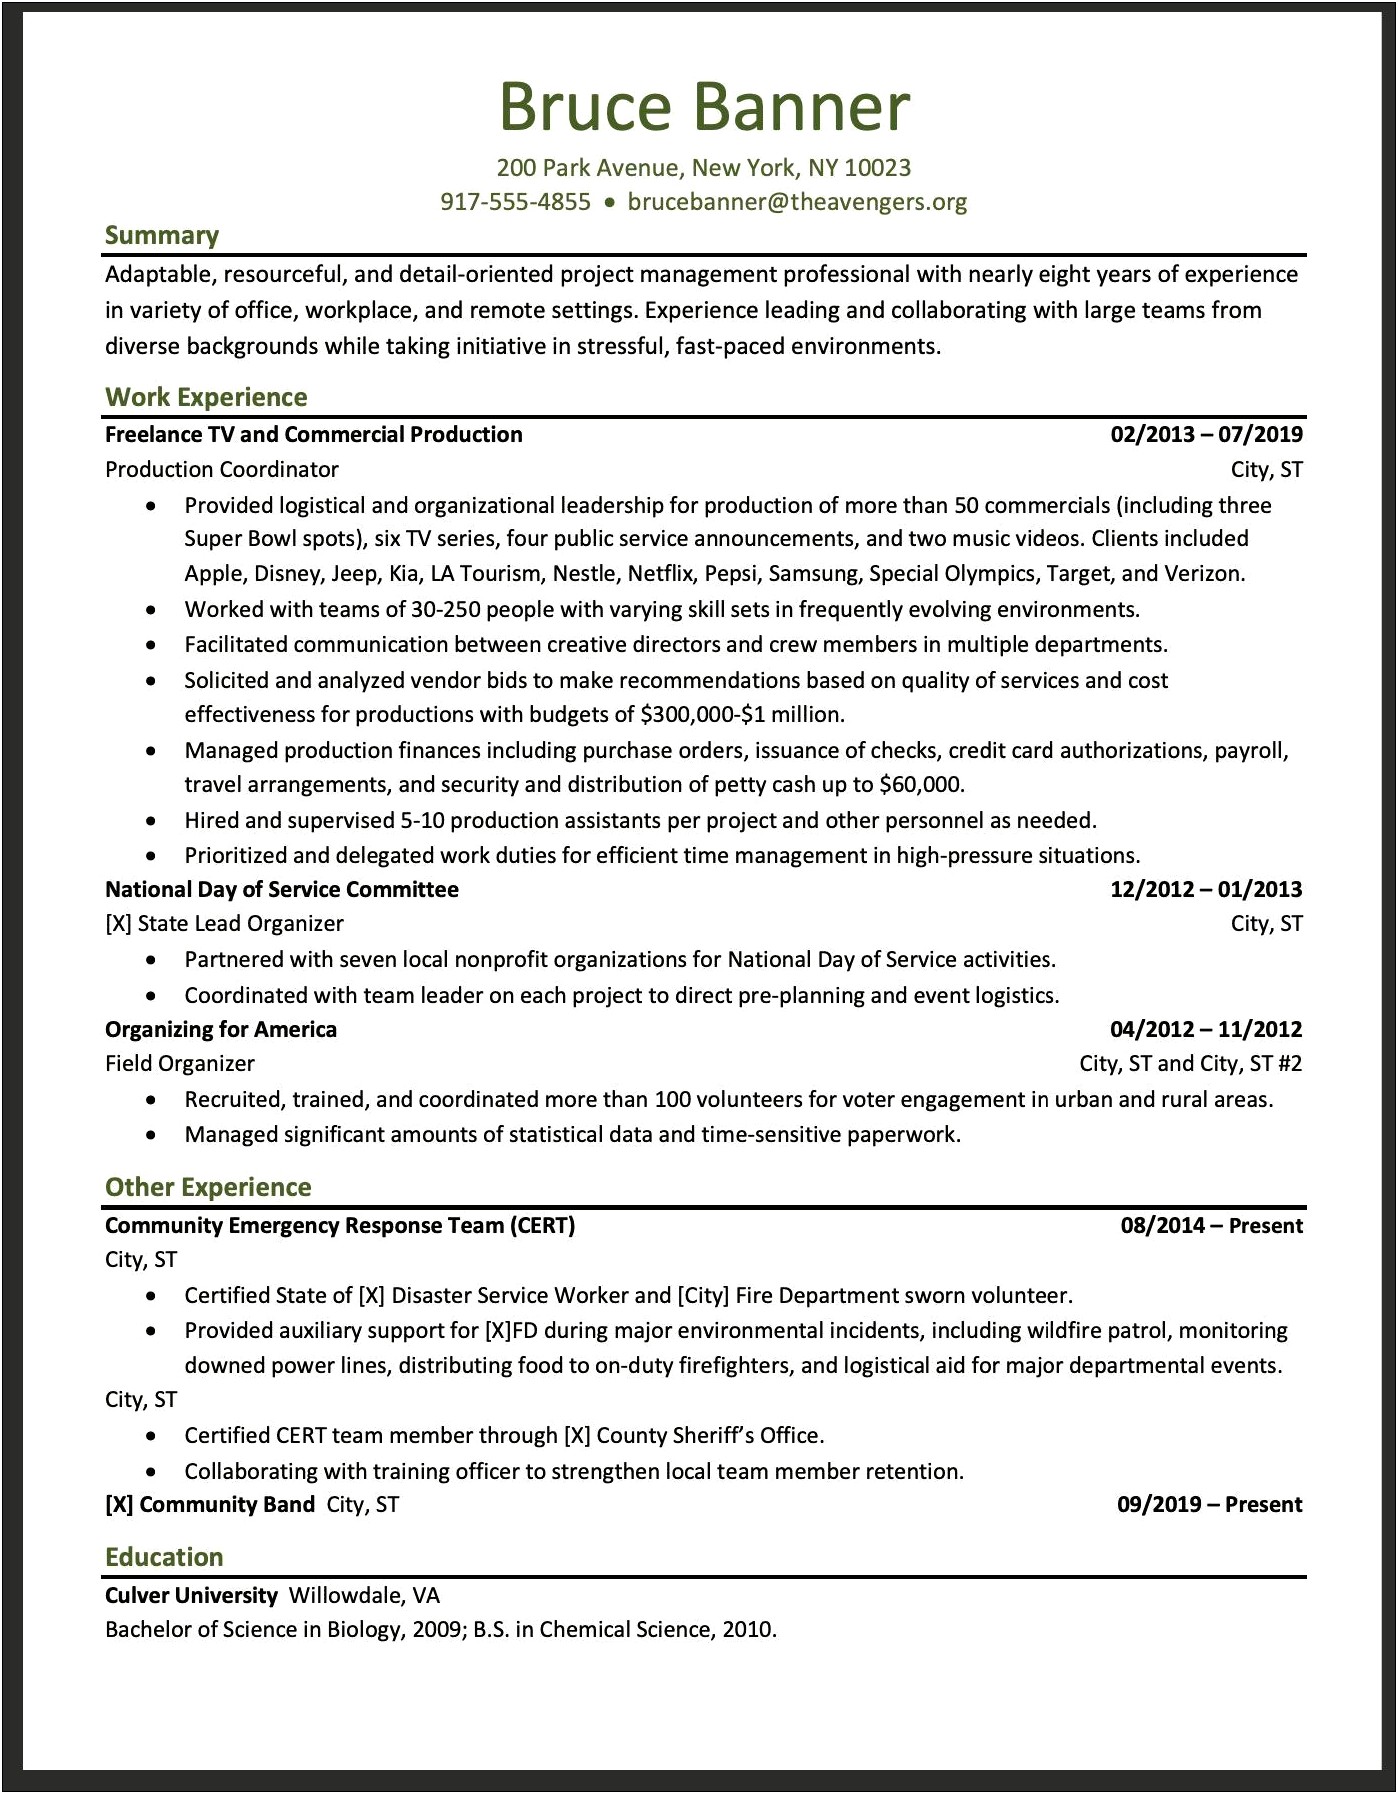 Resume Summary Looking For Change Of Industry